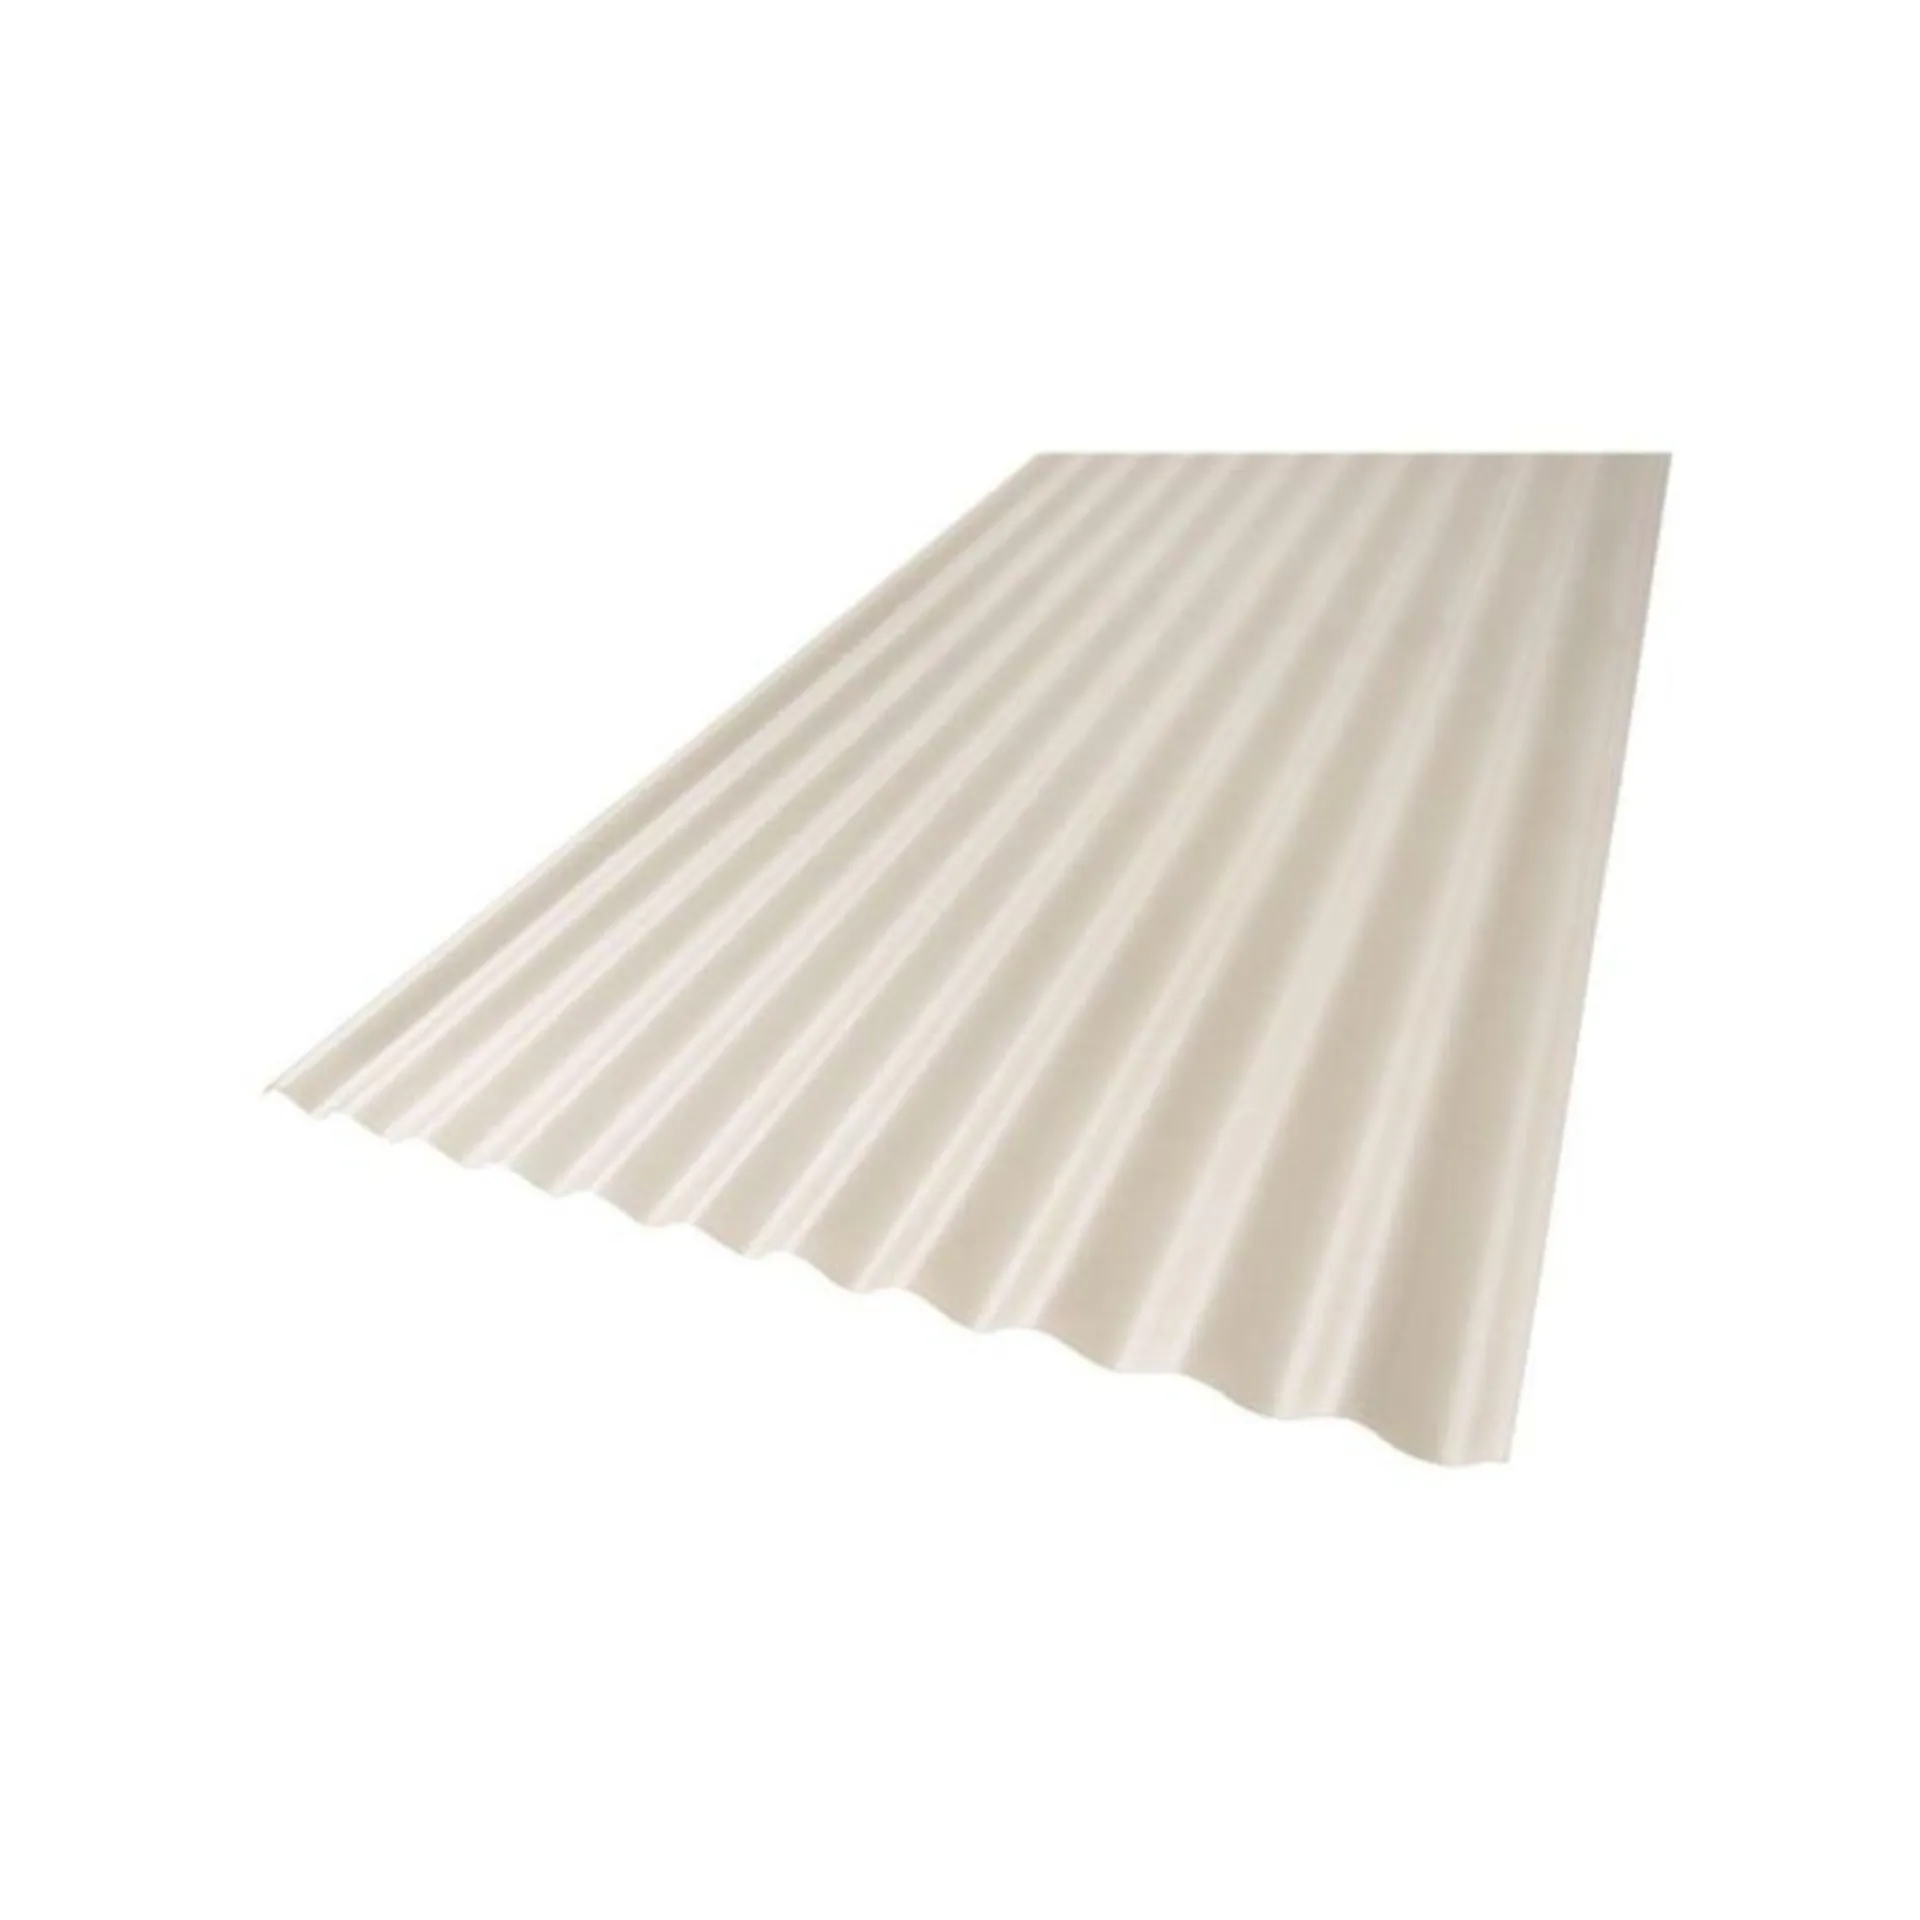 CoolTech Corrugated Roofing Sheet Ice 3000 x 860mm